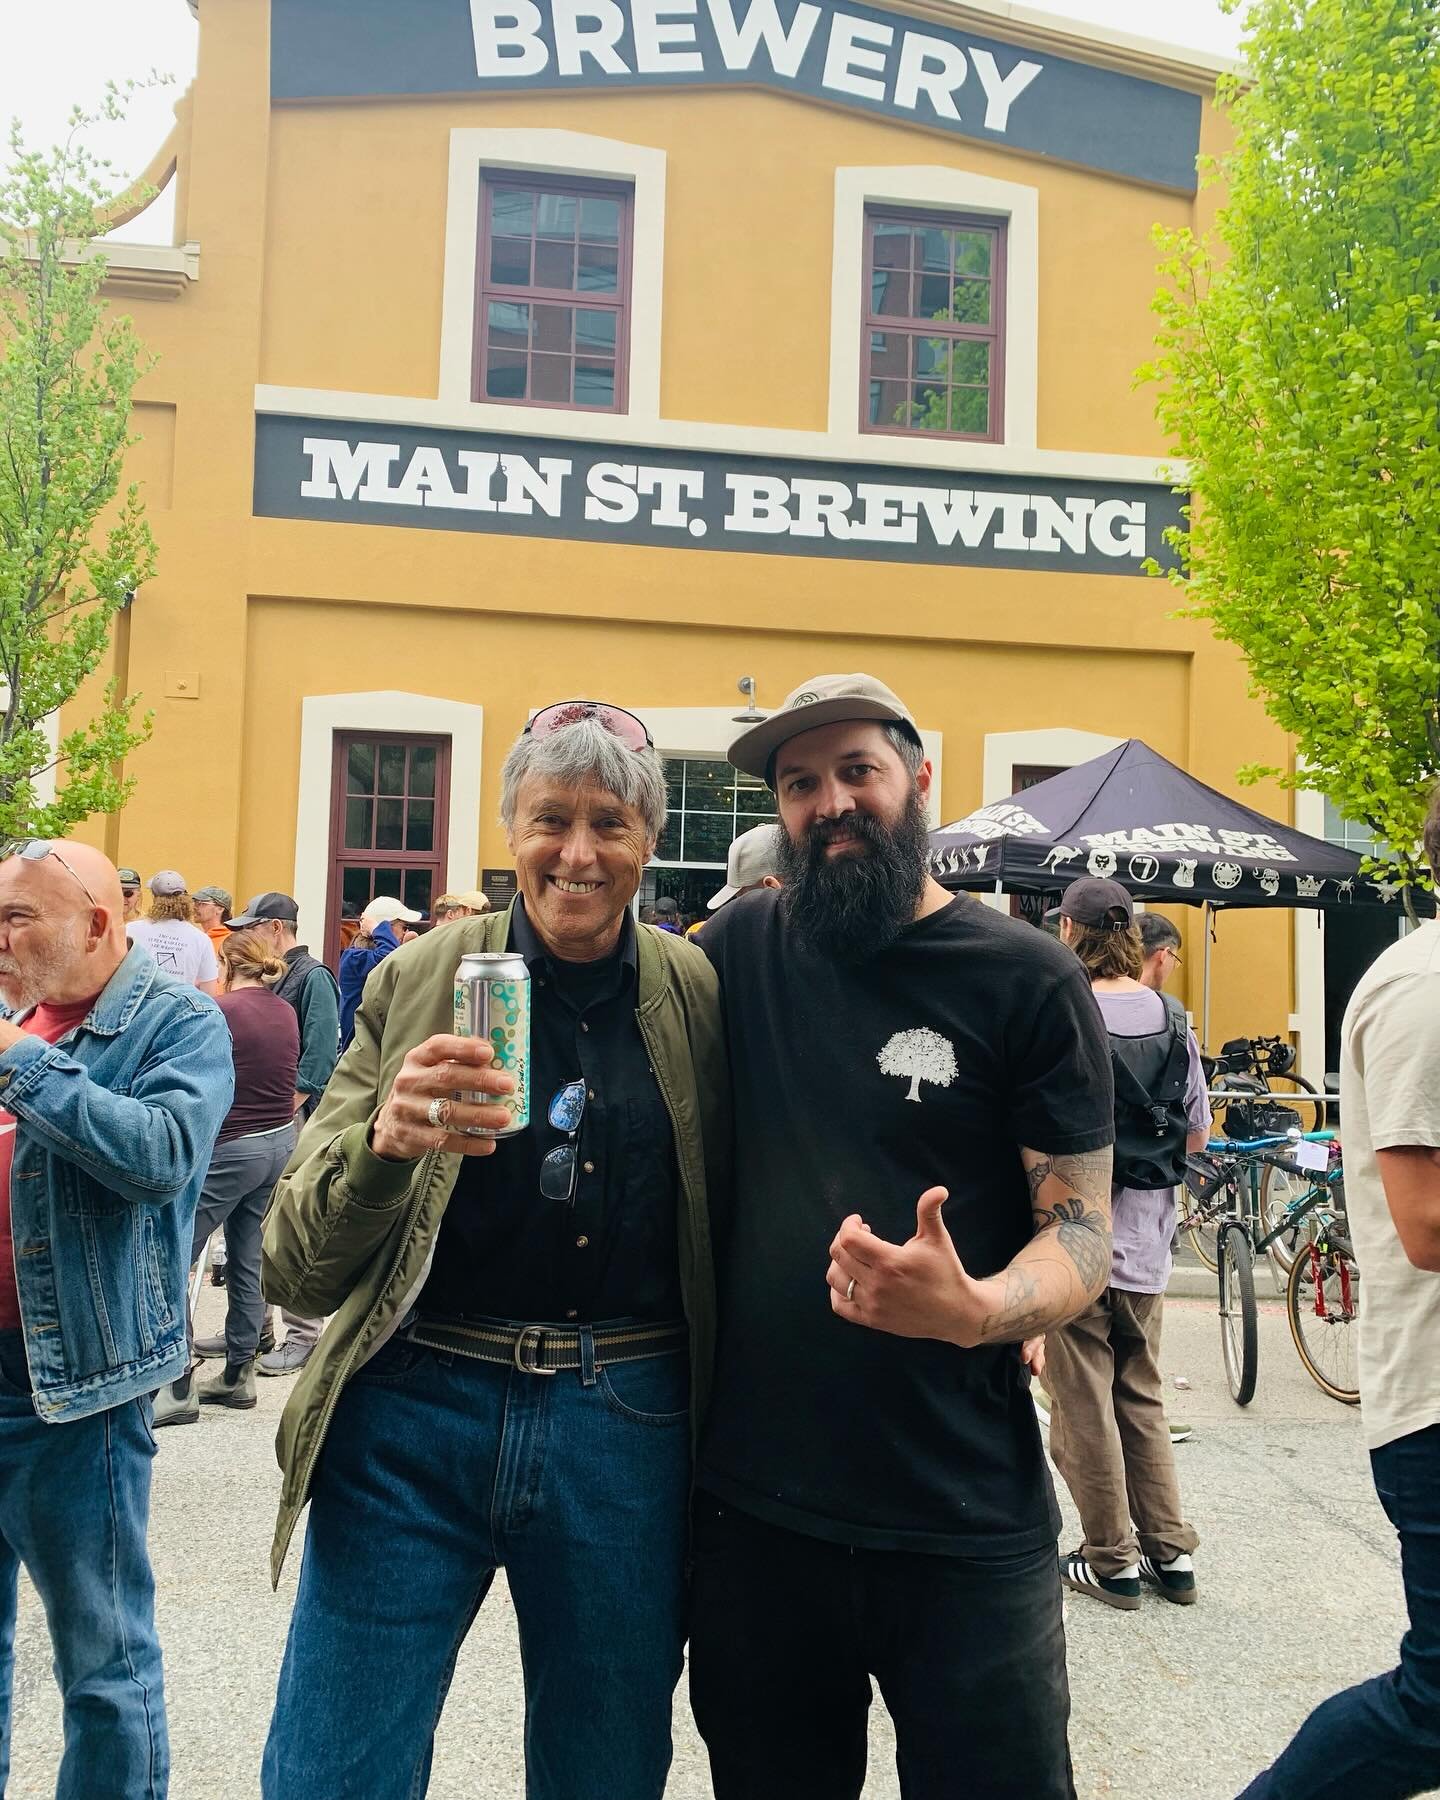 OUR MAIN MEN

Big shout-out to these two local legends &mdash; mystic guru of all things mountain biking Paul @brodie8191 and our Head Brewer Azlan @likethelion Graves. He&rsquo;s the one with the beard, BTW.

Paul was the inspiration for our new col